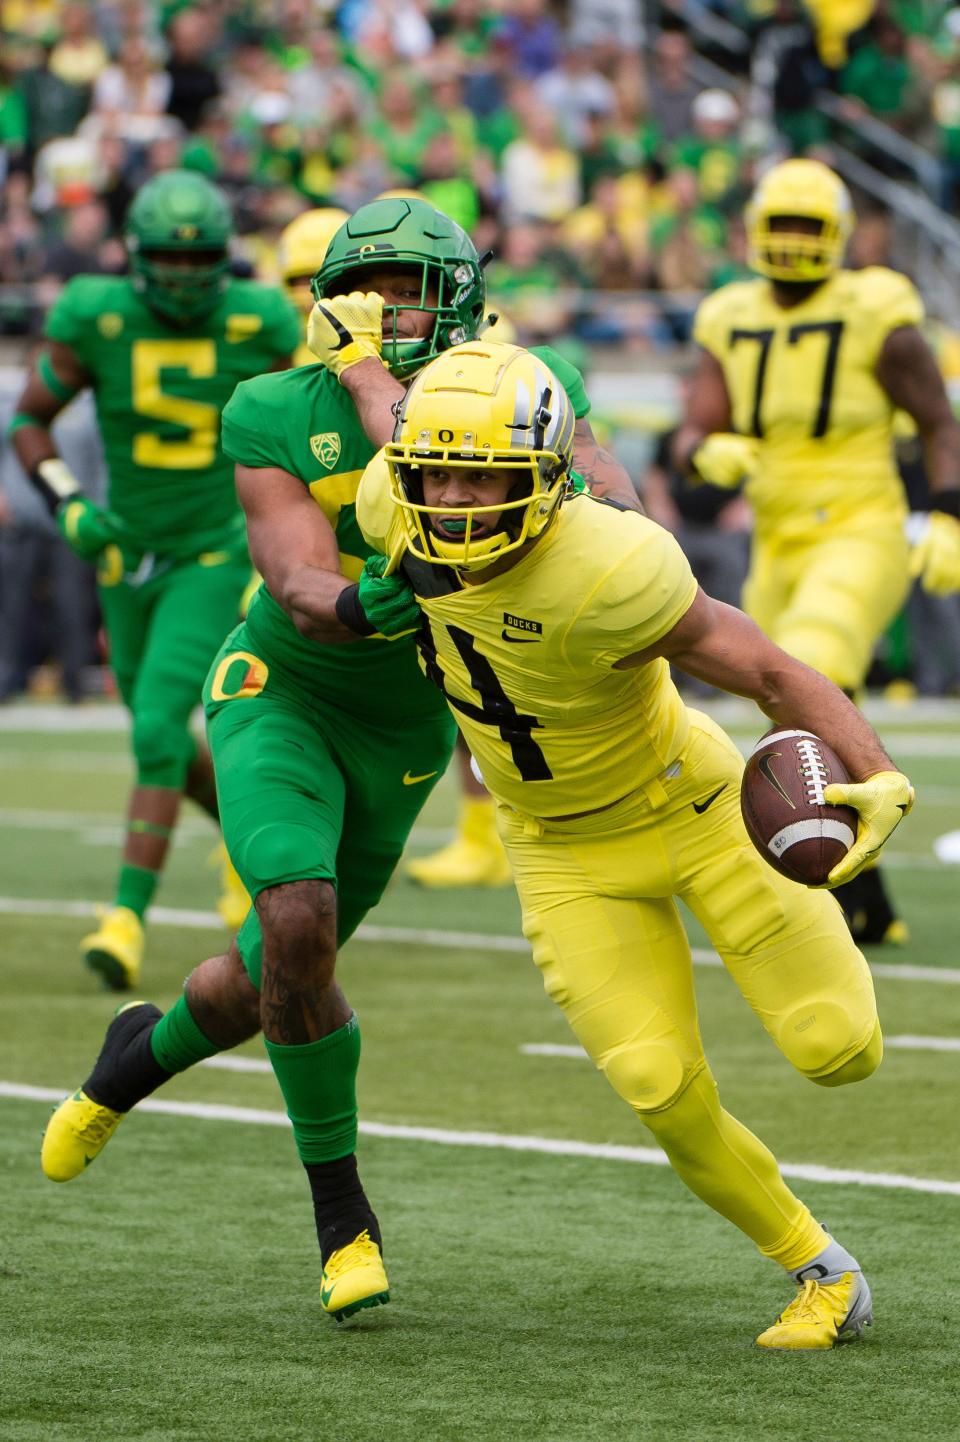 New FSU wide receiver Mycah Pittman had 151 punt return yards and averaged over 10 yards per return for the Oregon Ducks in 2021.